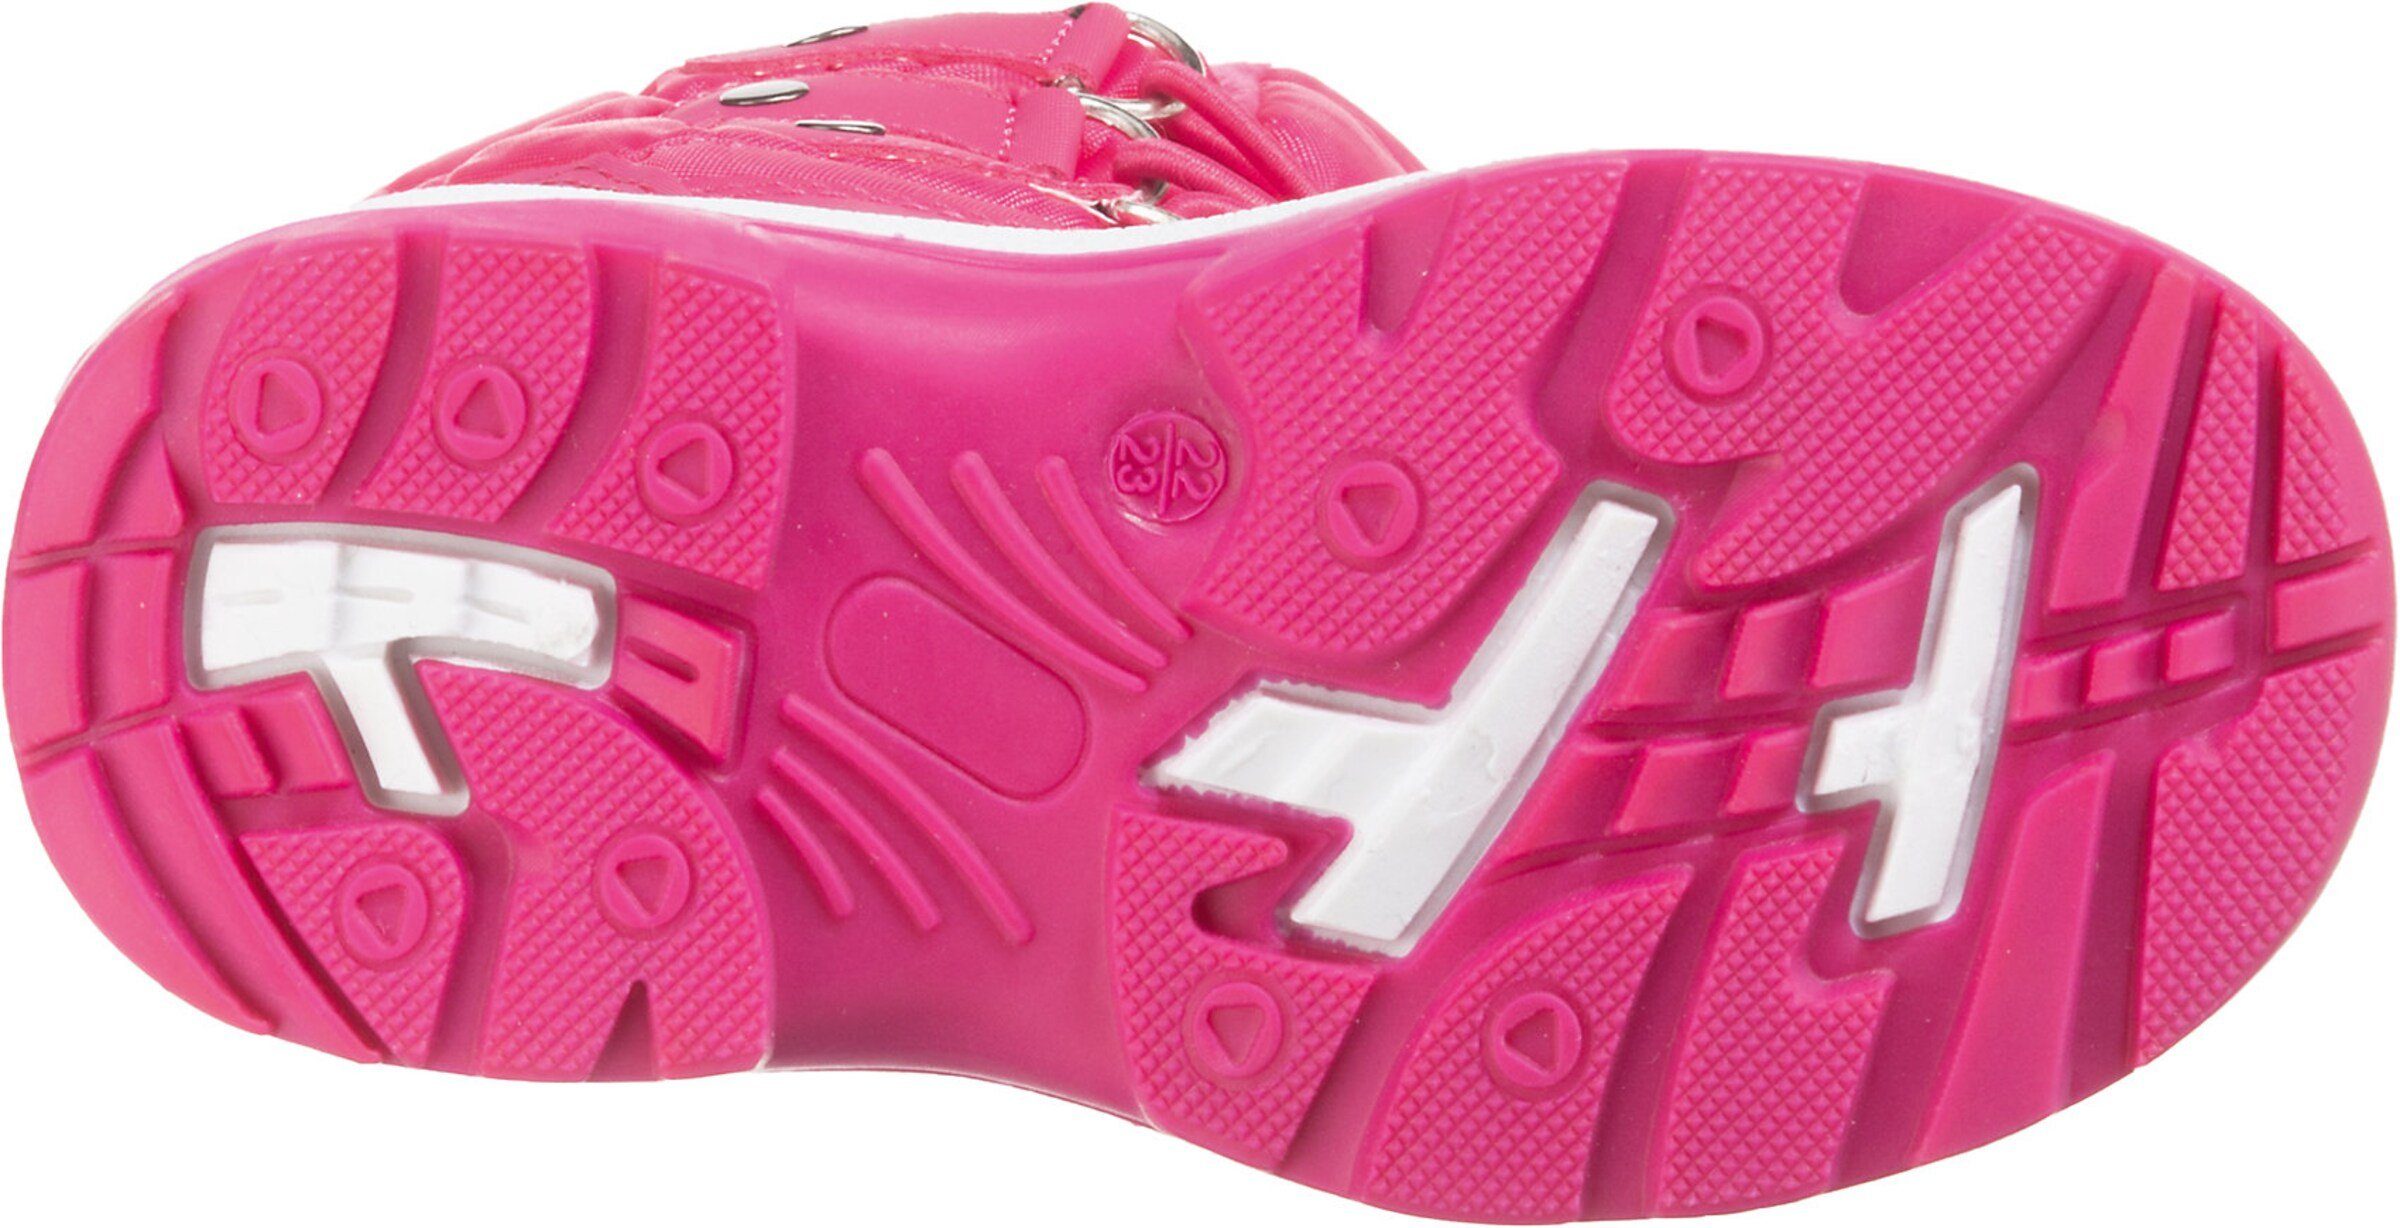 (1-tlg) Pink Snowboots Playshoes